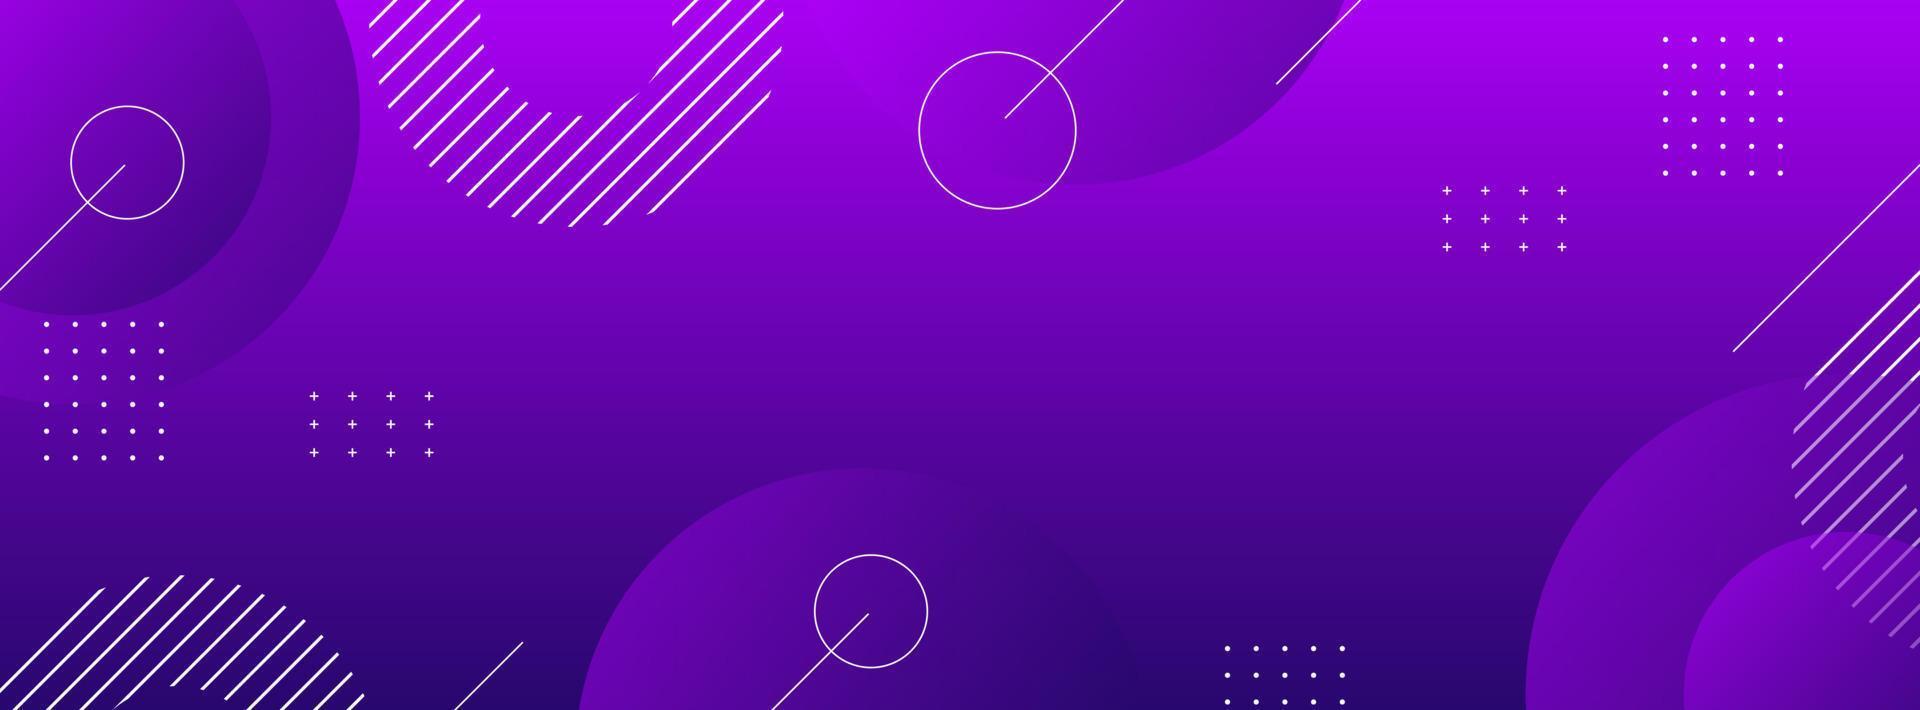 banner background. colorful, bright purple gradient, geometric effect eps 10 vector